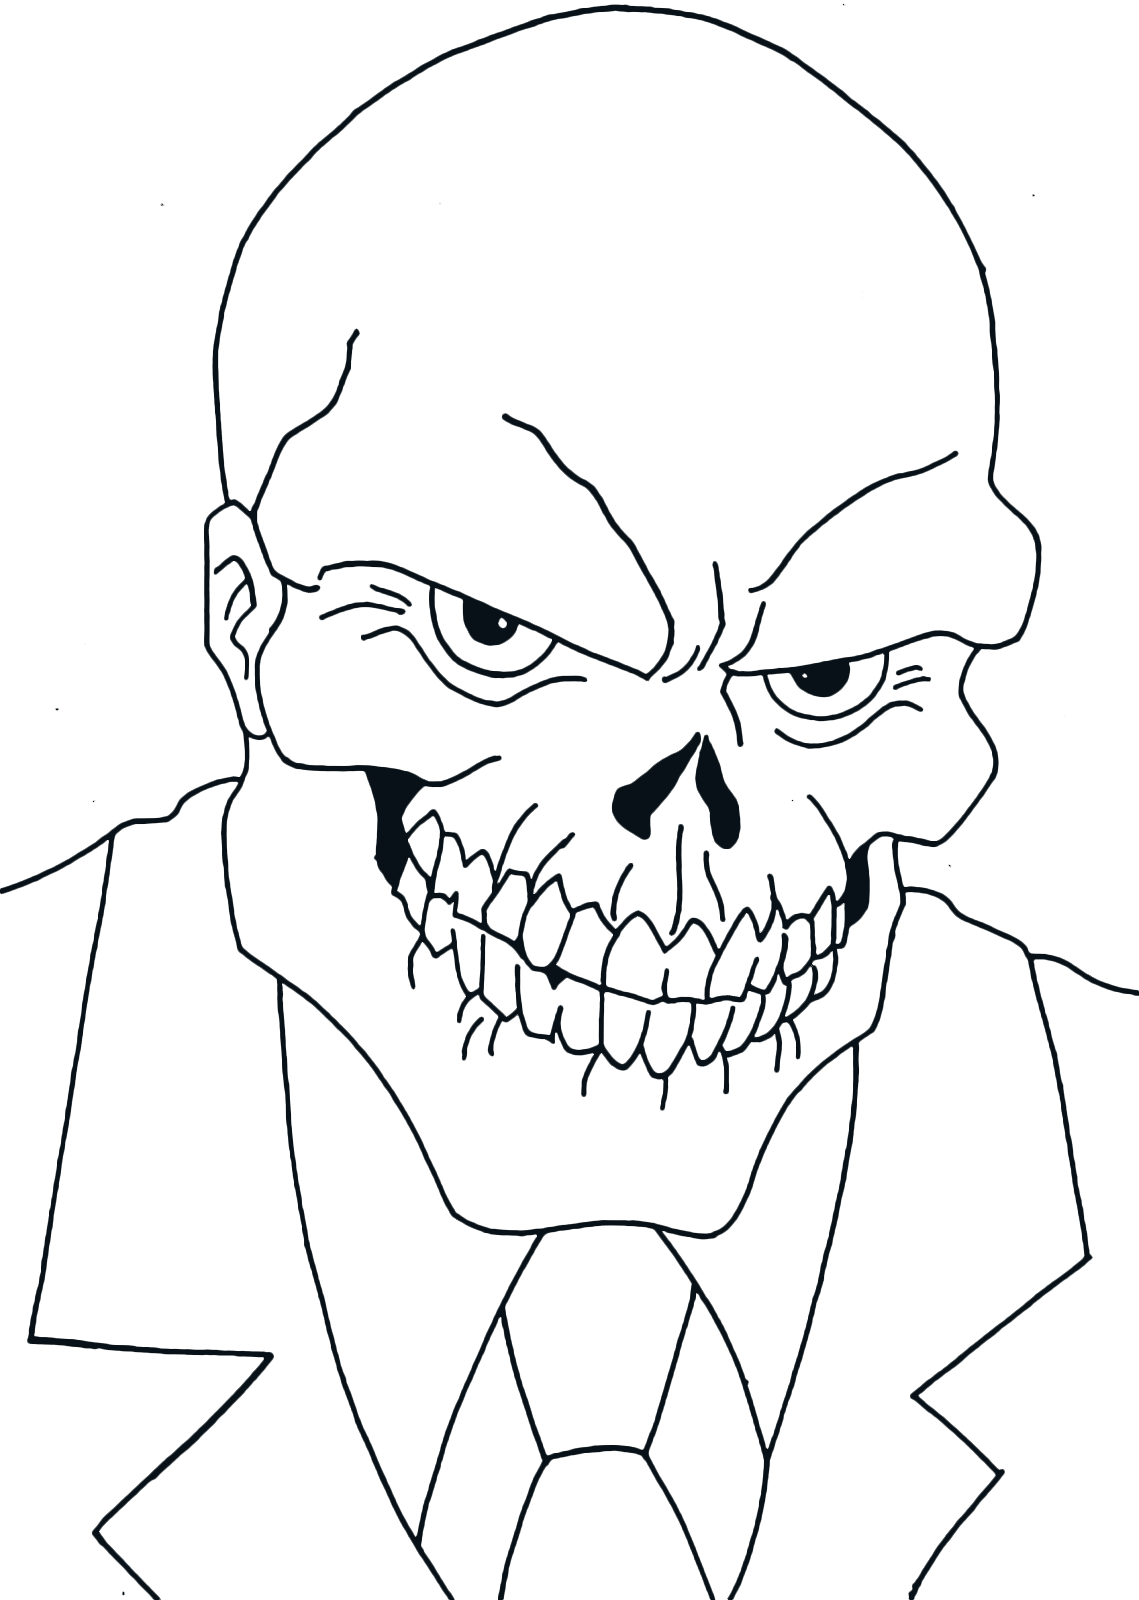 - A close-up the evil Red Skull